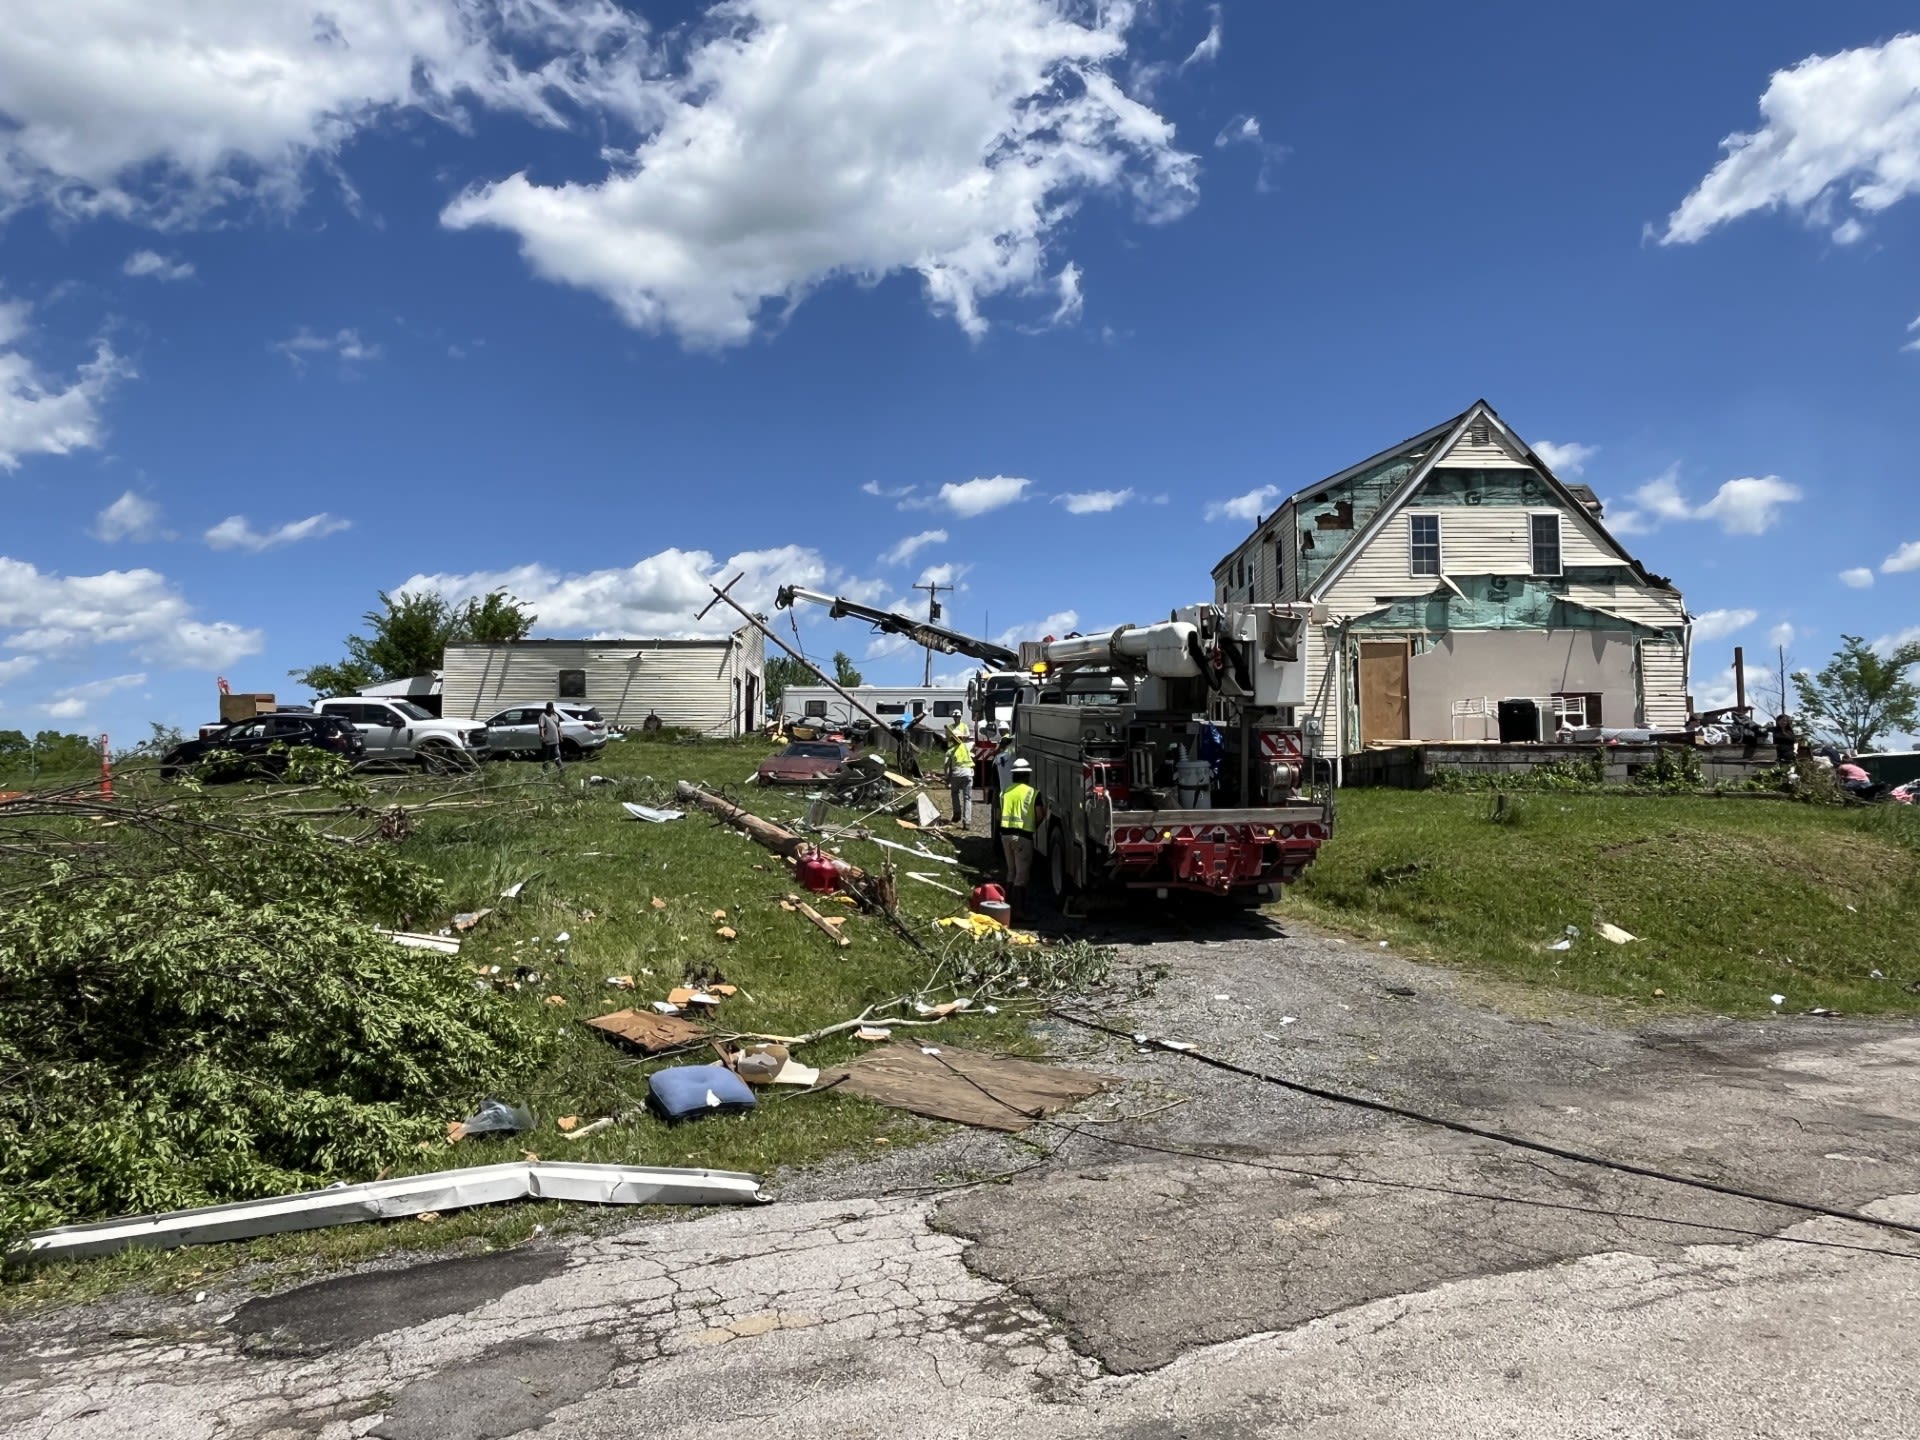 Hancock County tornado causes severe damage to a small area - WV MetroNews